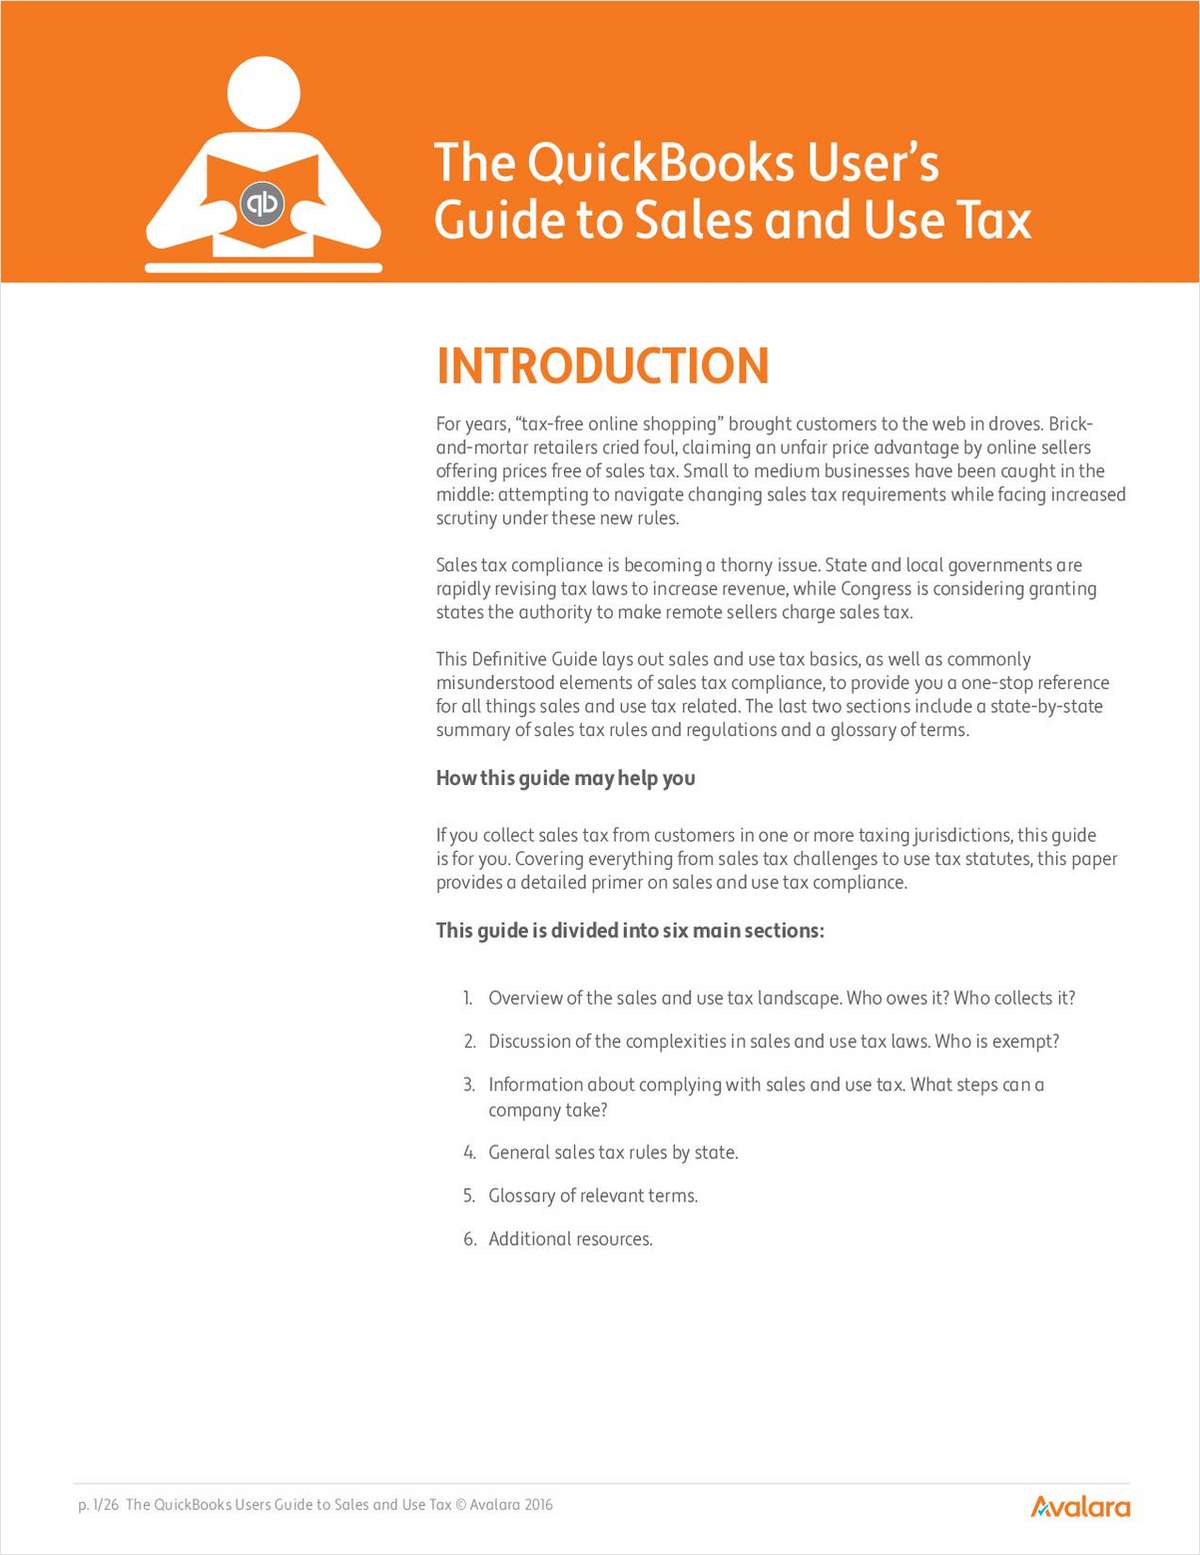 The QuickBooks User's Guide to Sales and Use Tax